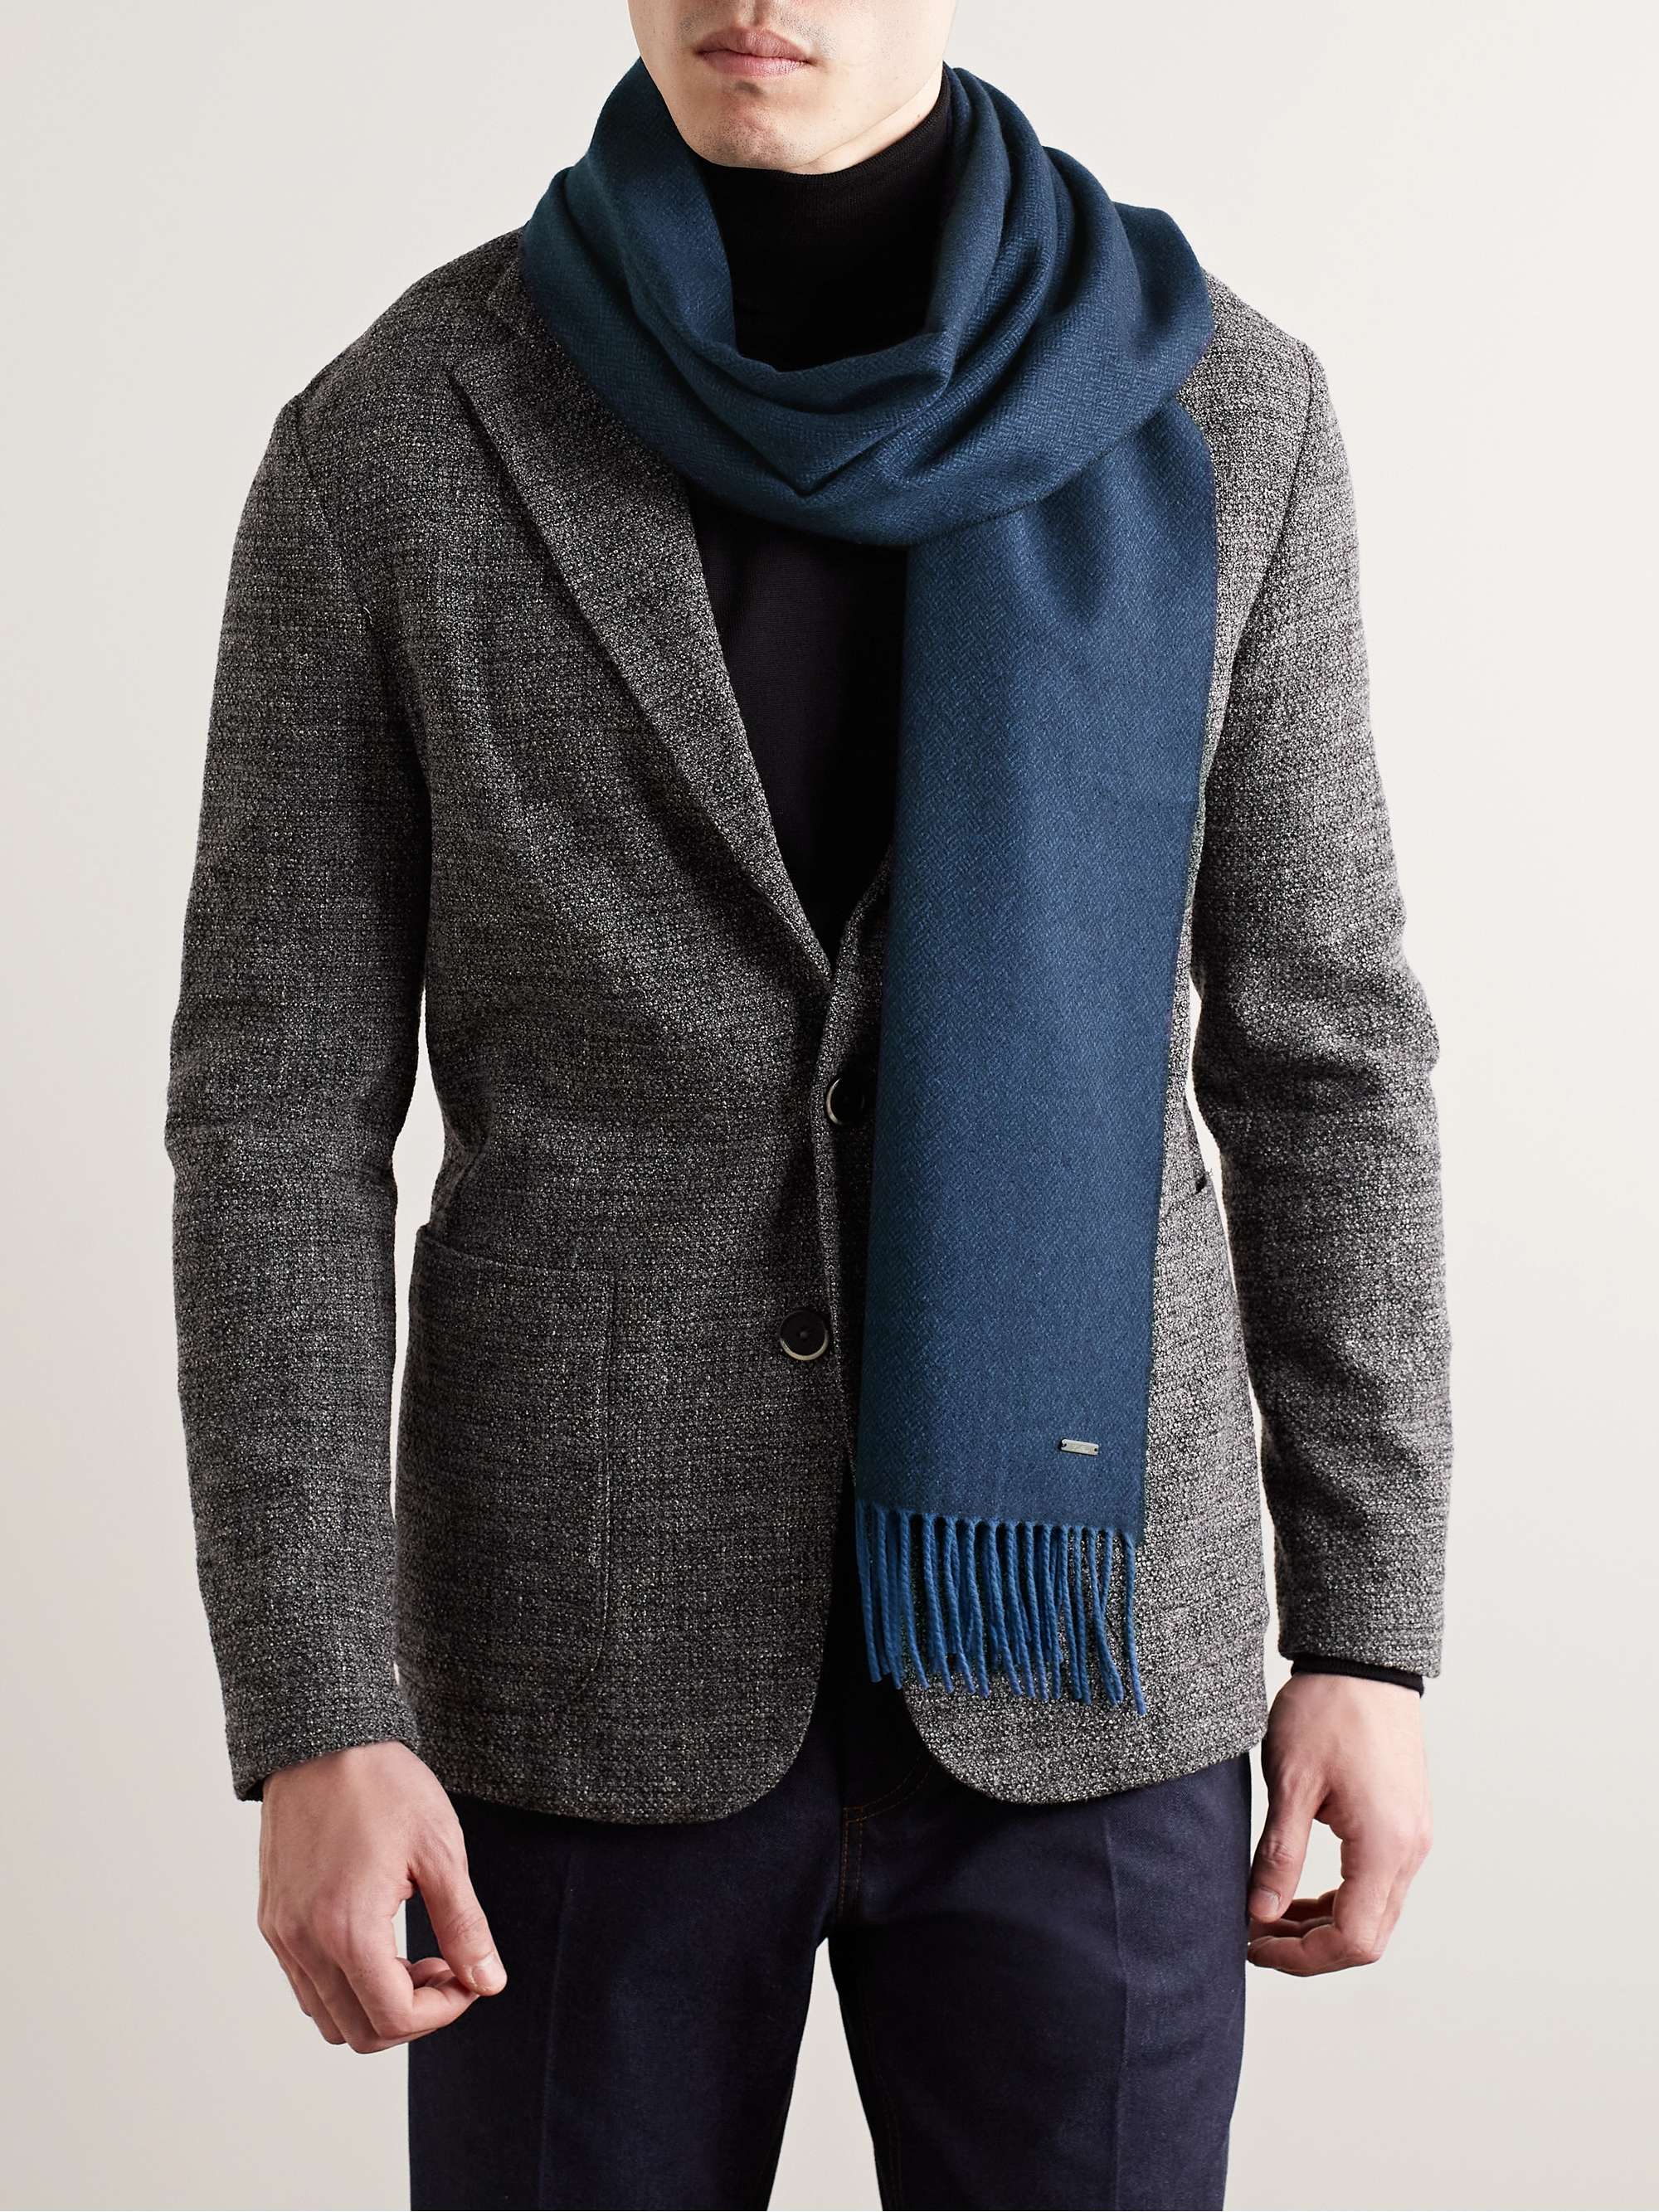 GABRIELA HEARST Ribbed Cashmere Scarf for Men